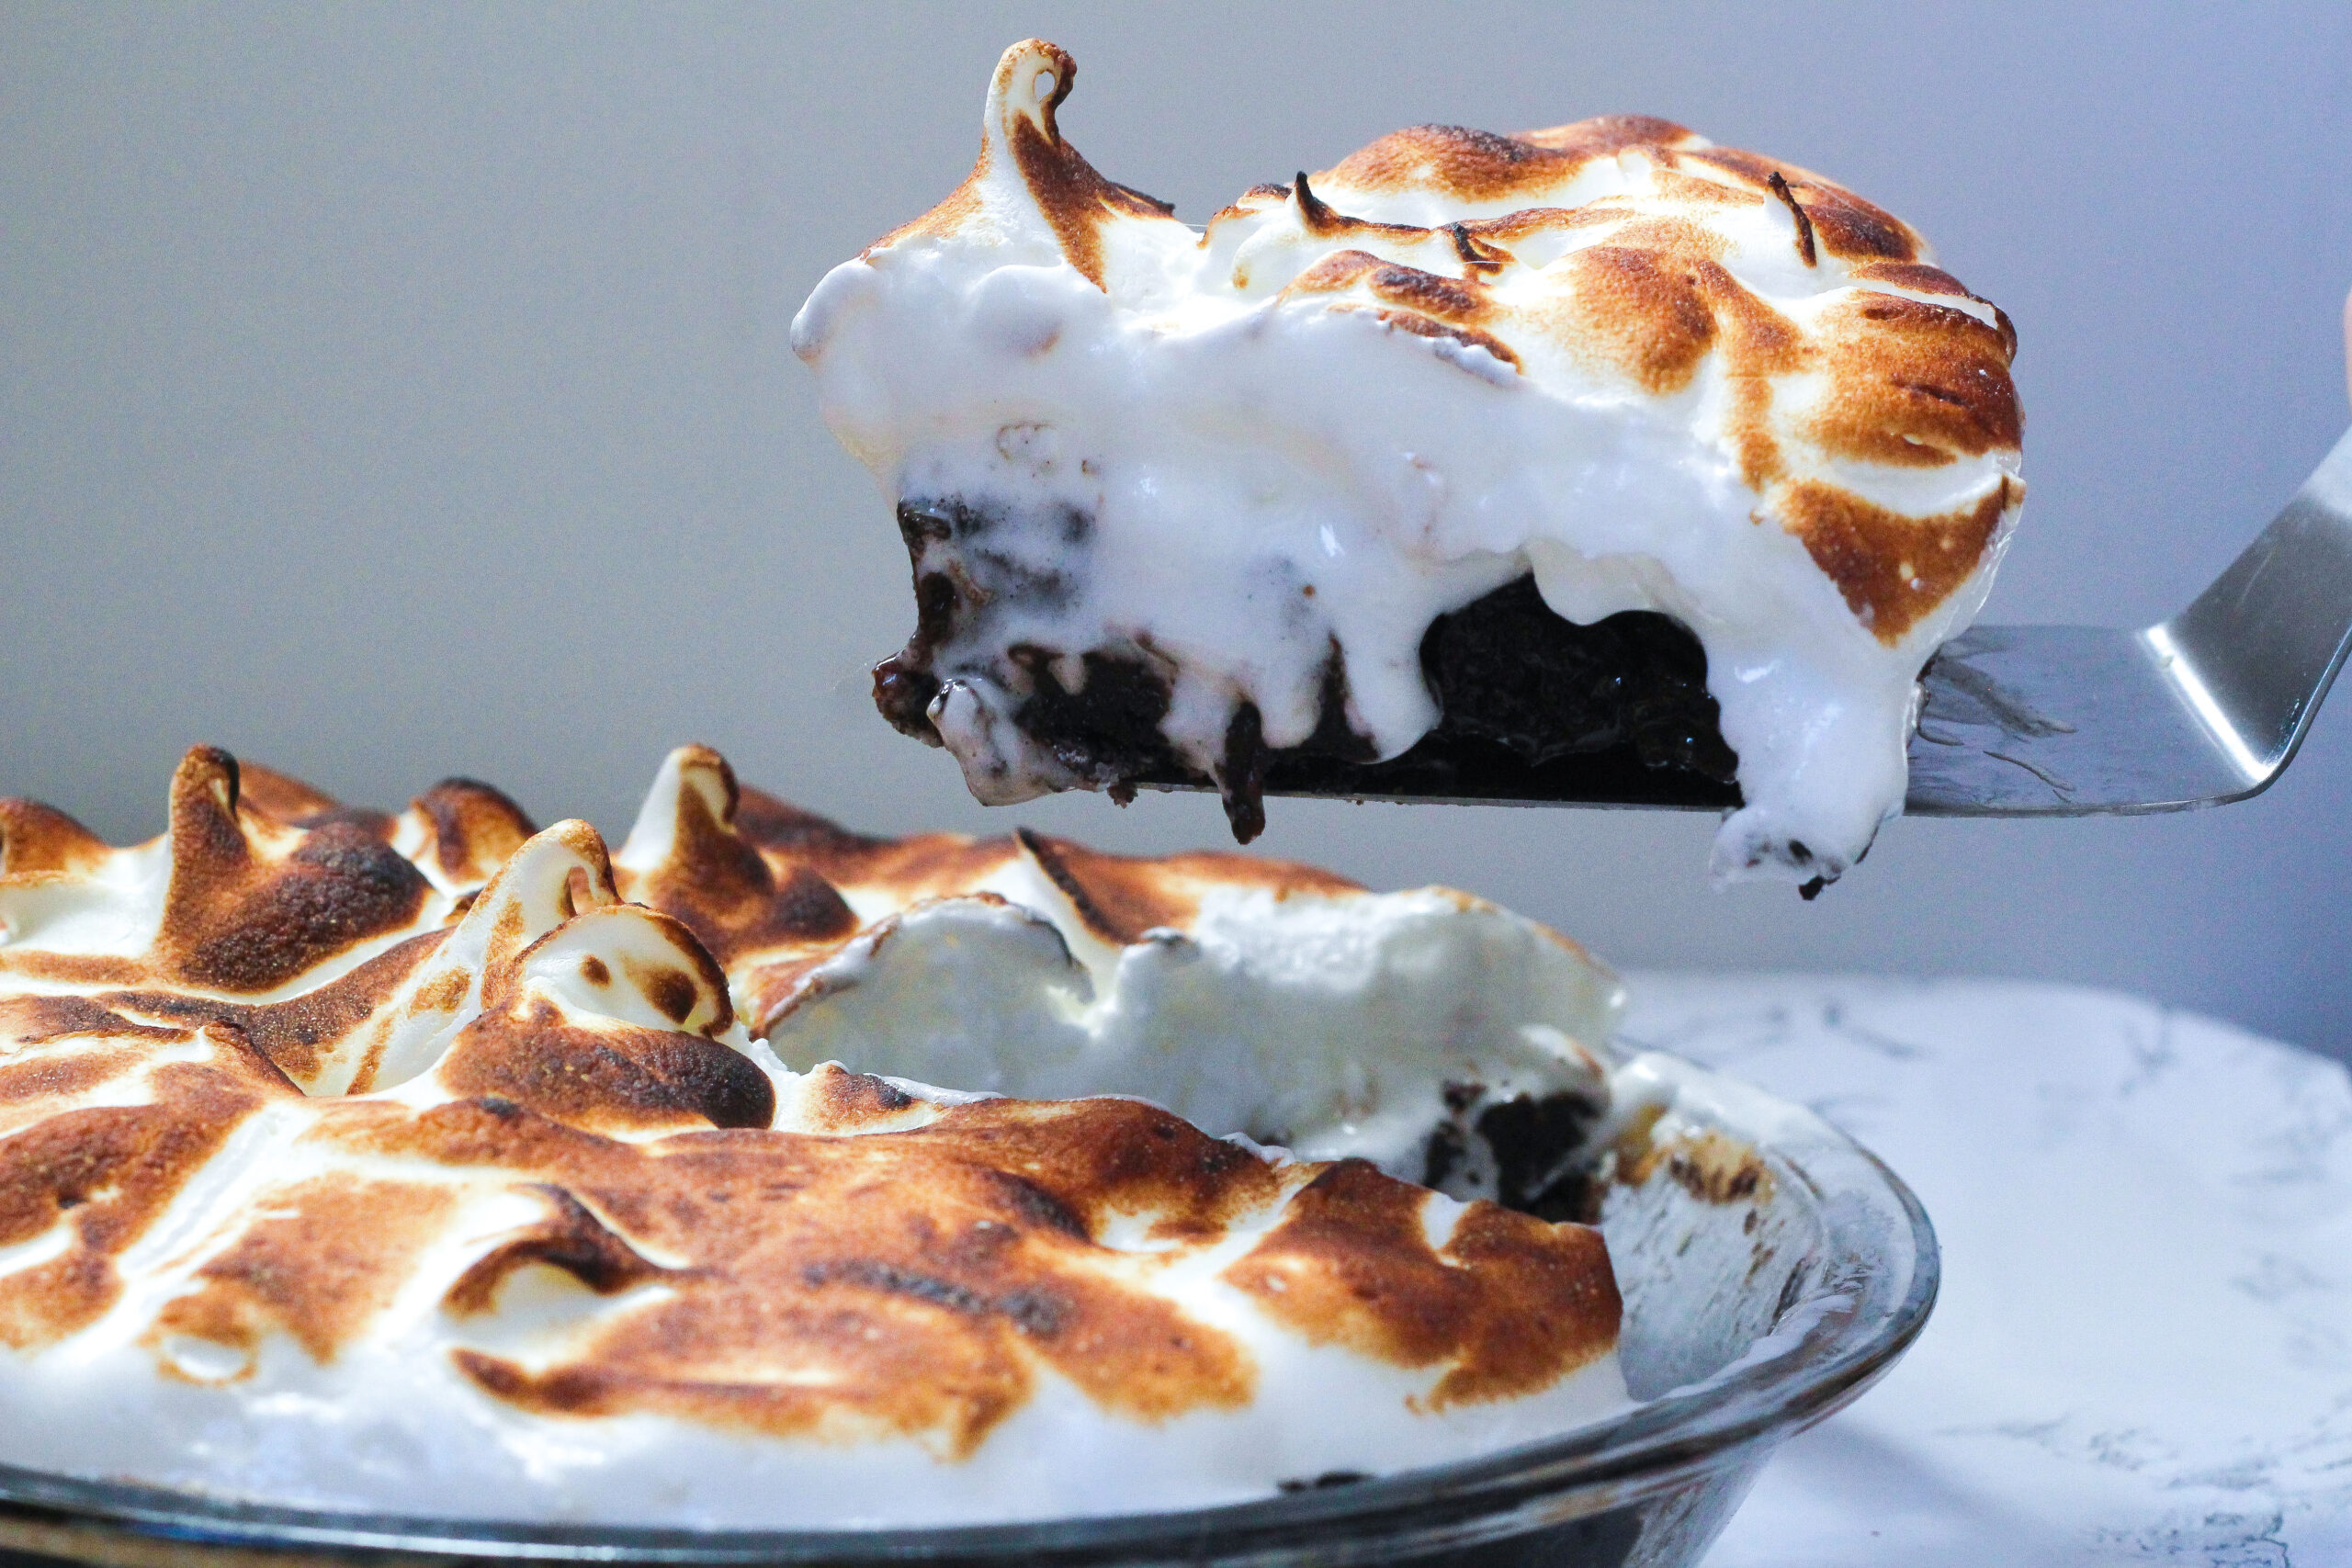 Side view of a mocha meringue pie on the left, with a single slice being lifted out on a pie server on the right